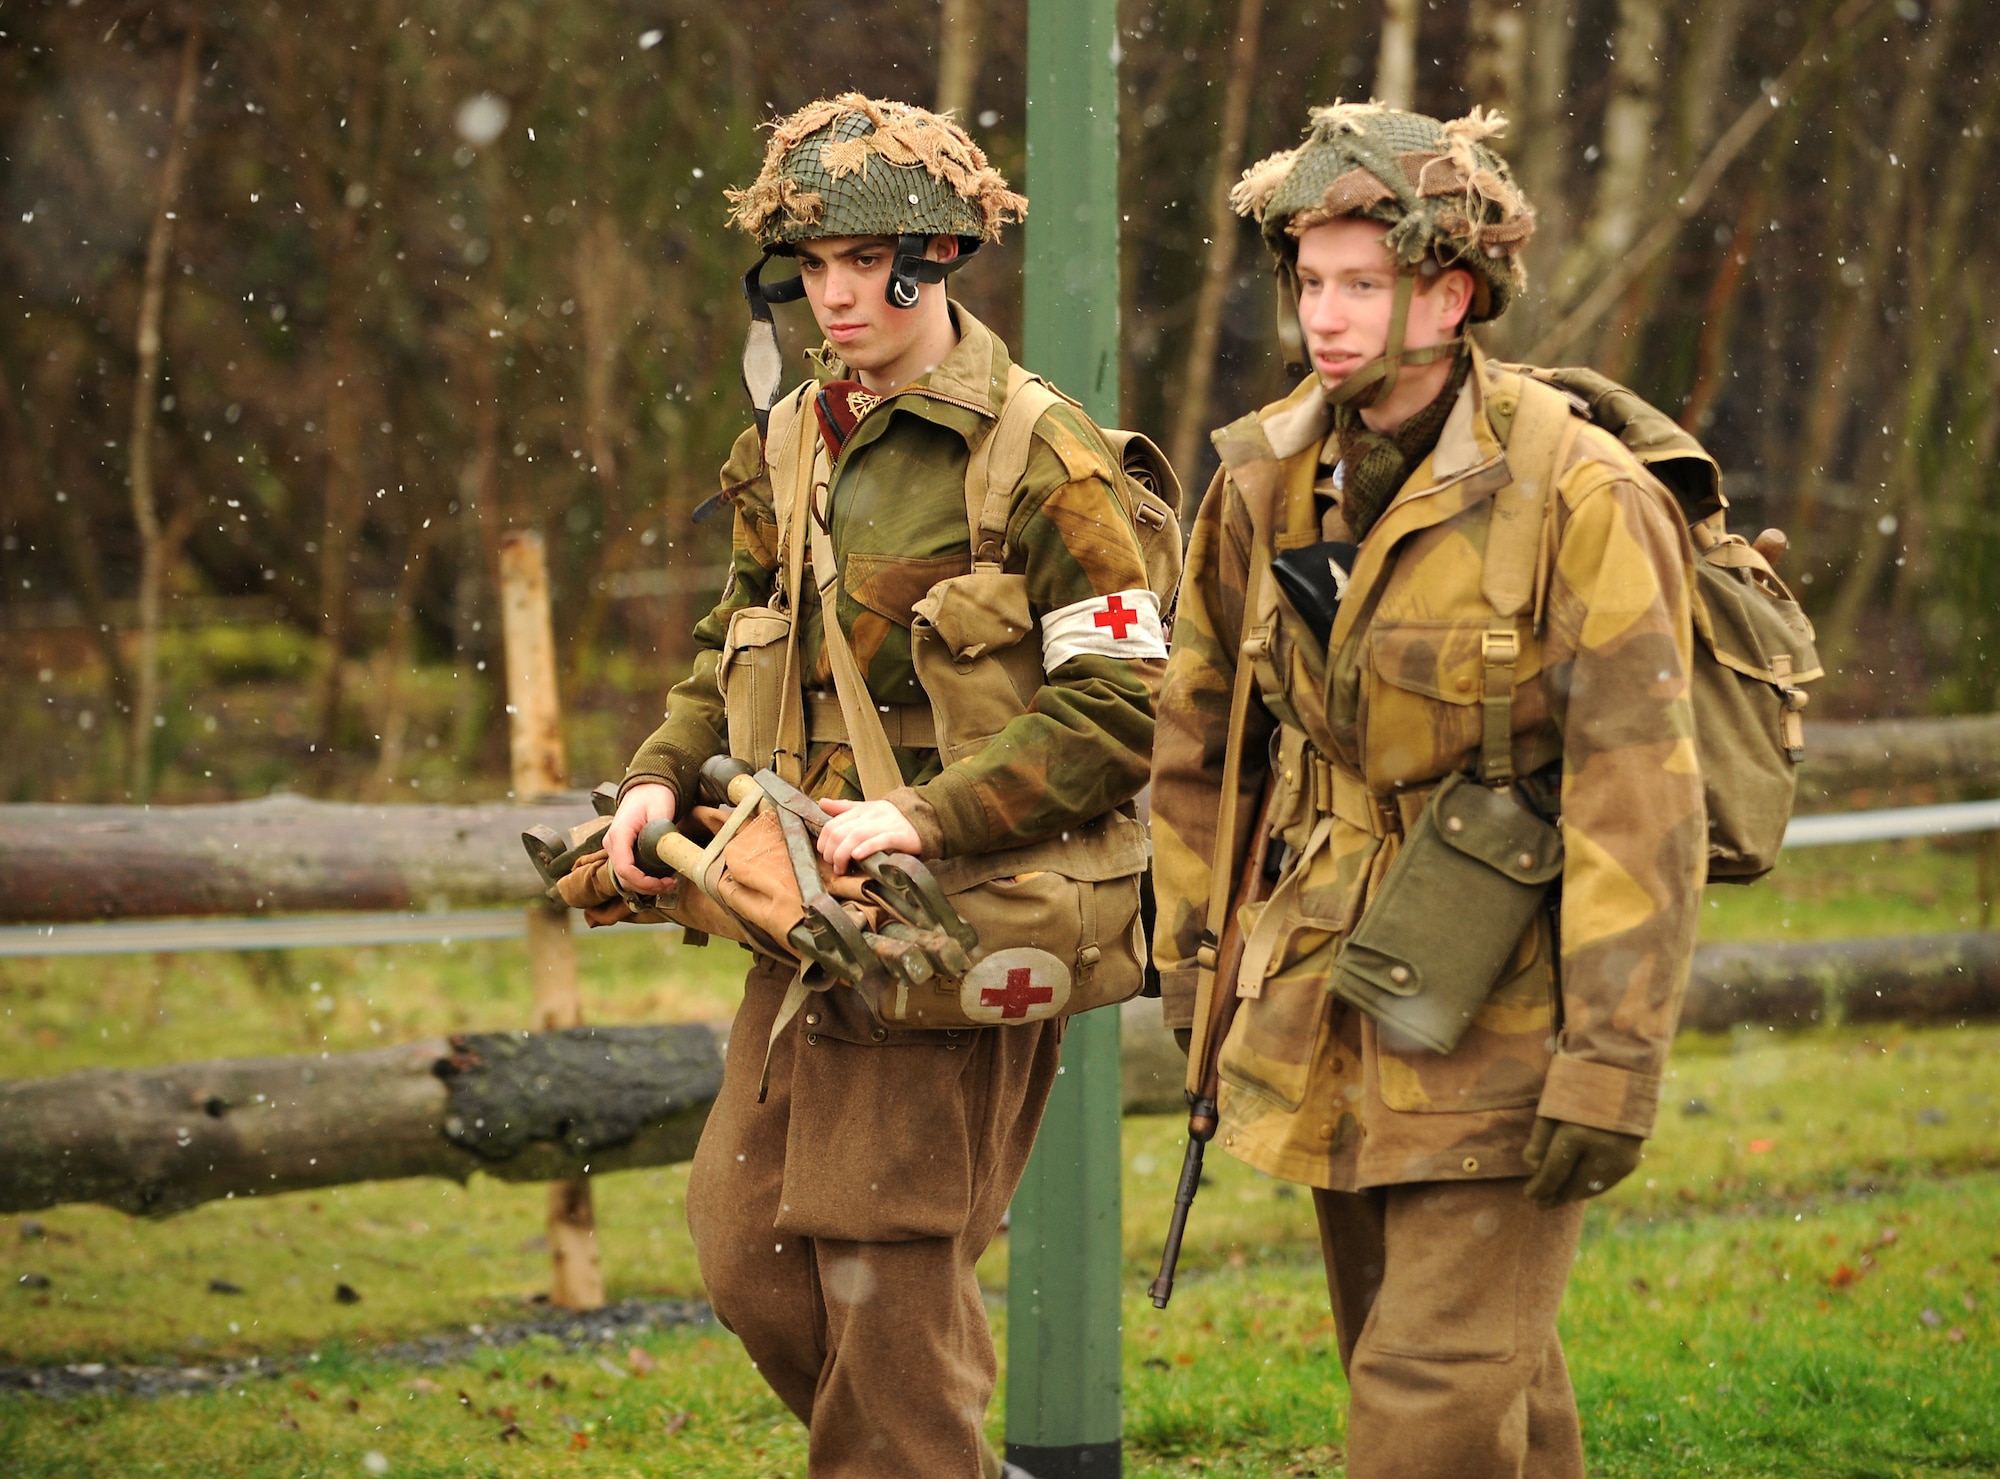 World War II re-enactors walk along a trail Dec. 12, 2009, during the 32nd Bastogne Historic Walk here in Bastogne, Belguim. Despite the snow and cold, more than 4,500 people from across Europe and the world participated in the event. (U.S. Air Force photo/Airman 1st Class Nathanael Callon)
